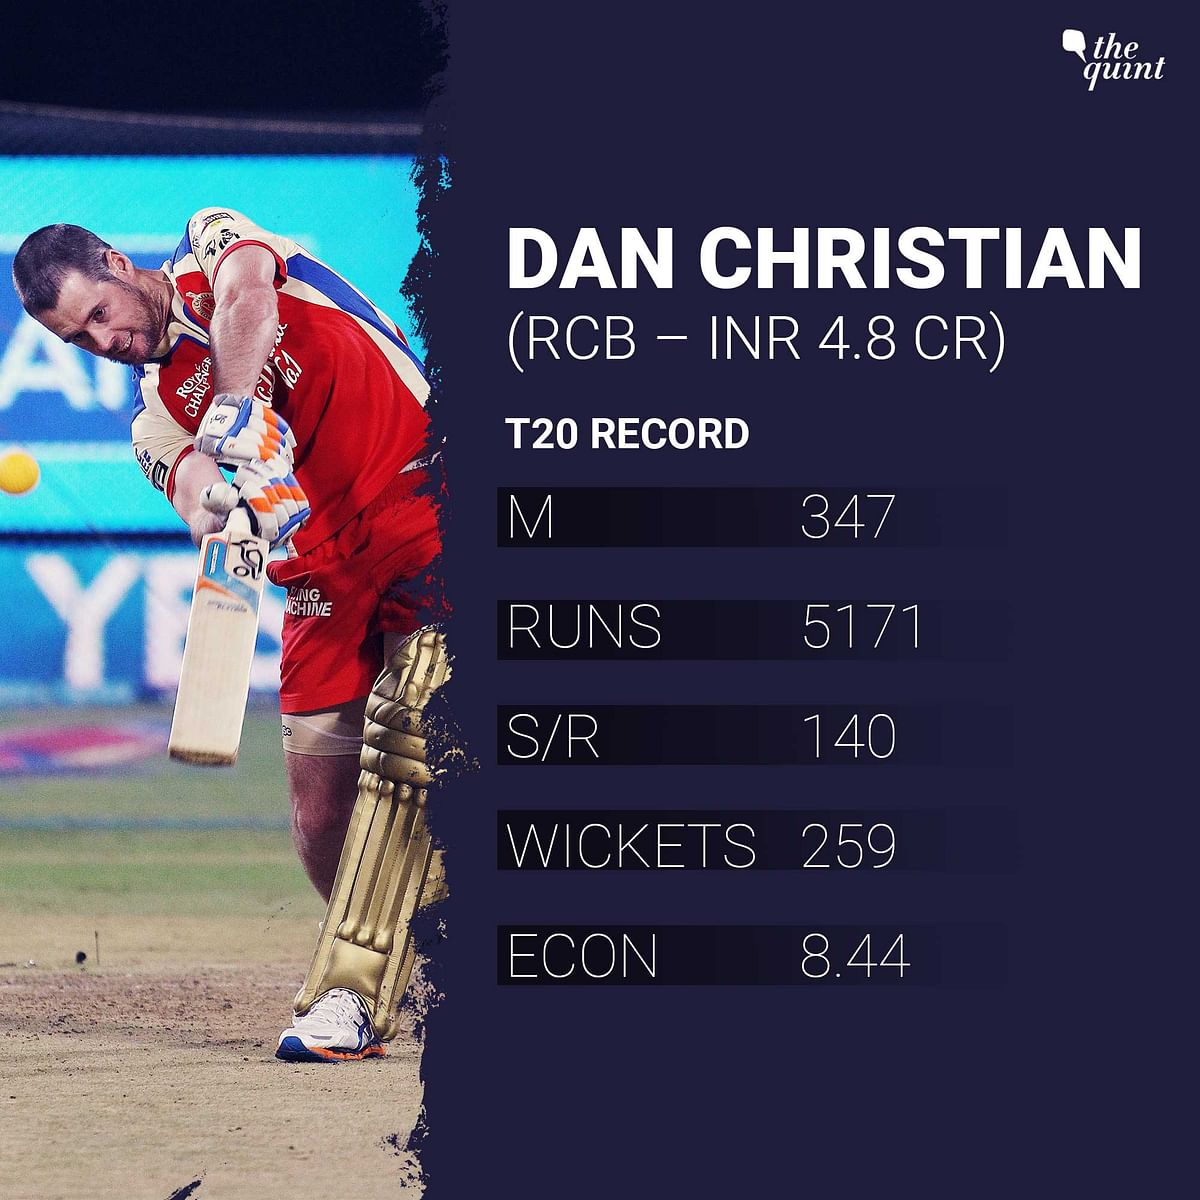 The likes of Dawid Malan and Kyle Jamieson are among the newcomers while Dan Christian has unfinished business.